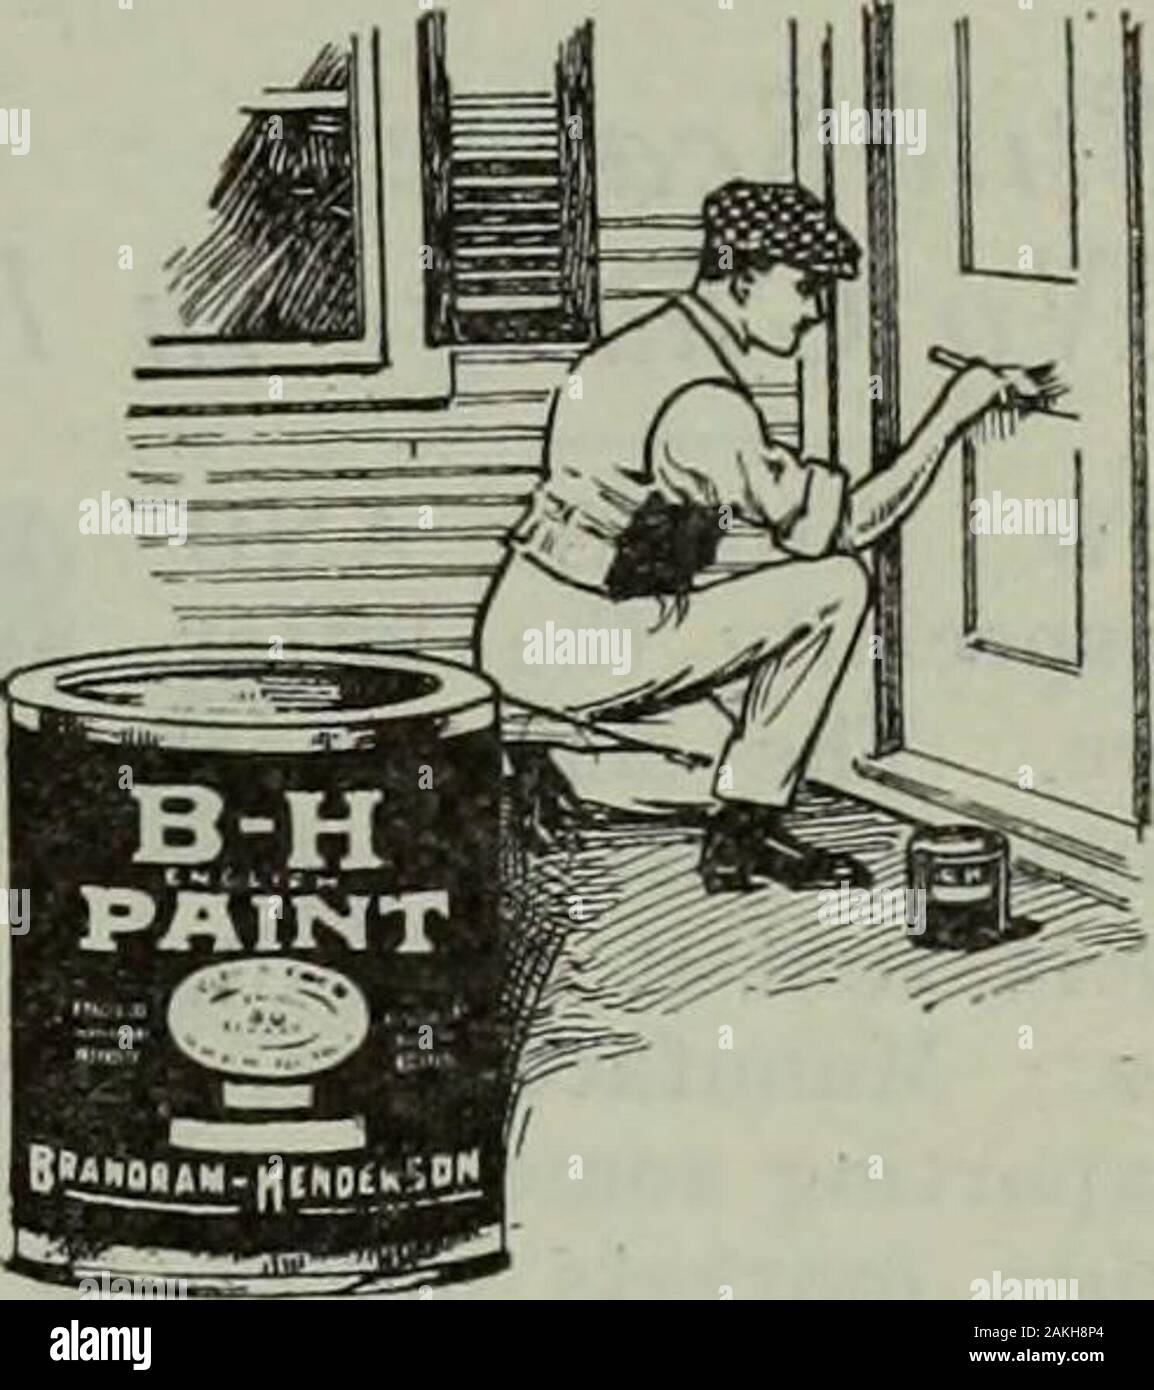 Hardware merchandising September-December 1919 . Your requestfor informationwill place youunder no obli-gation. Stock Photo